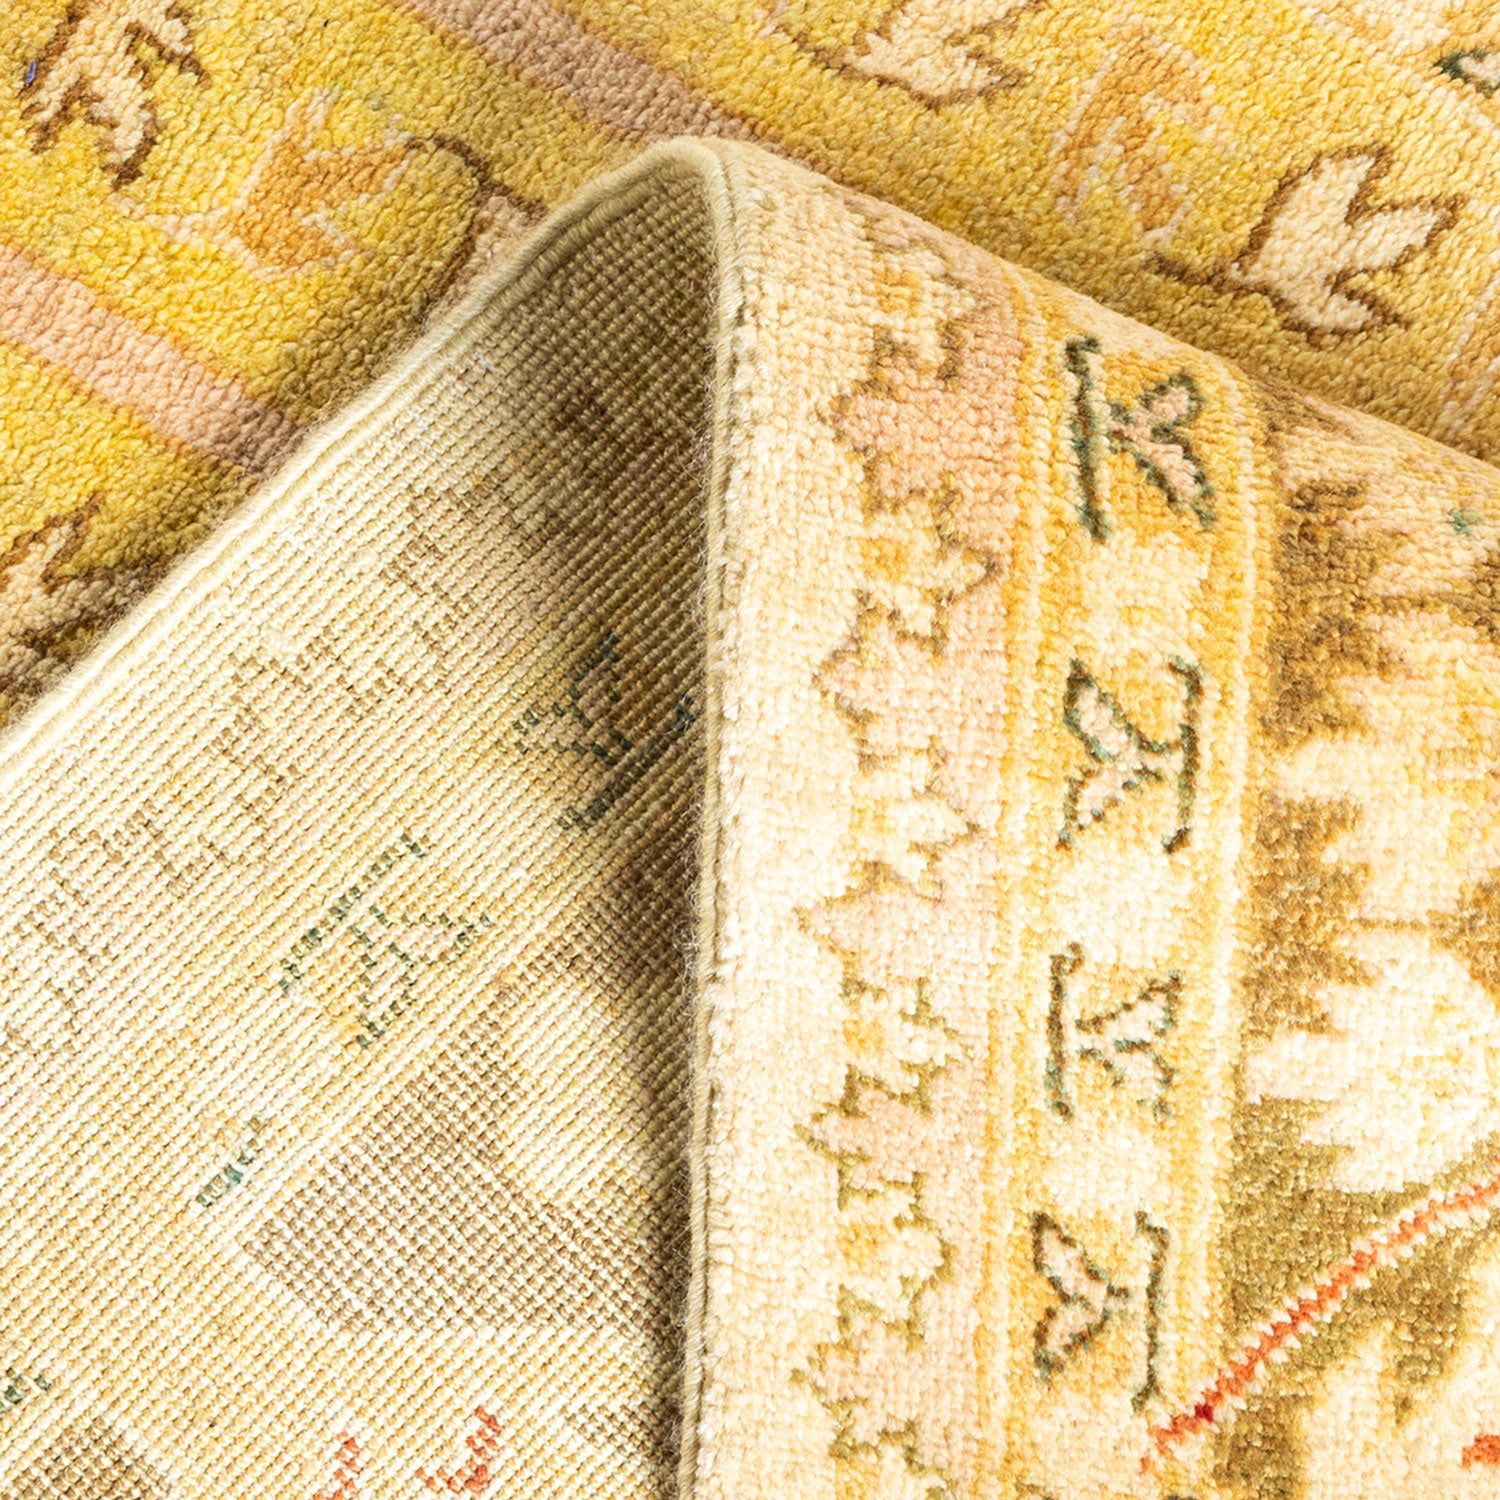 Close-up of a traditional floral rug with folded section revealing pattern and texture.